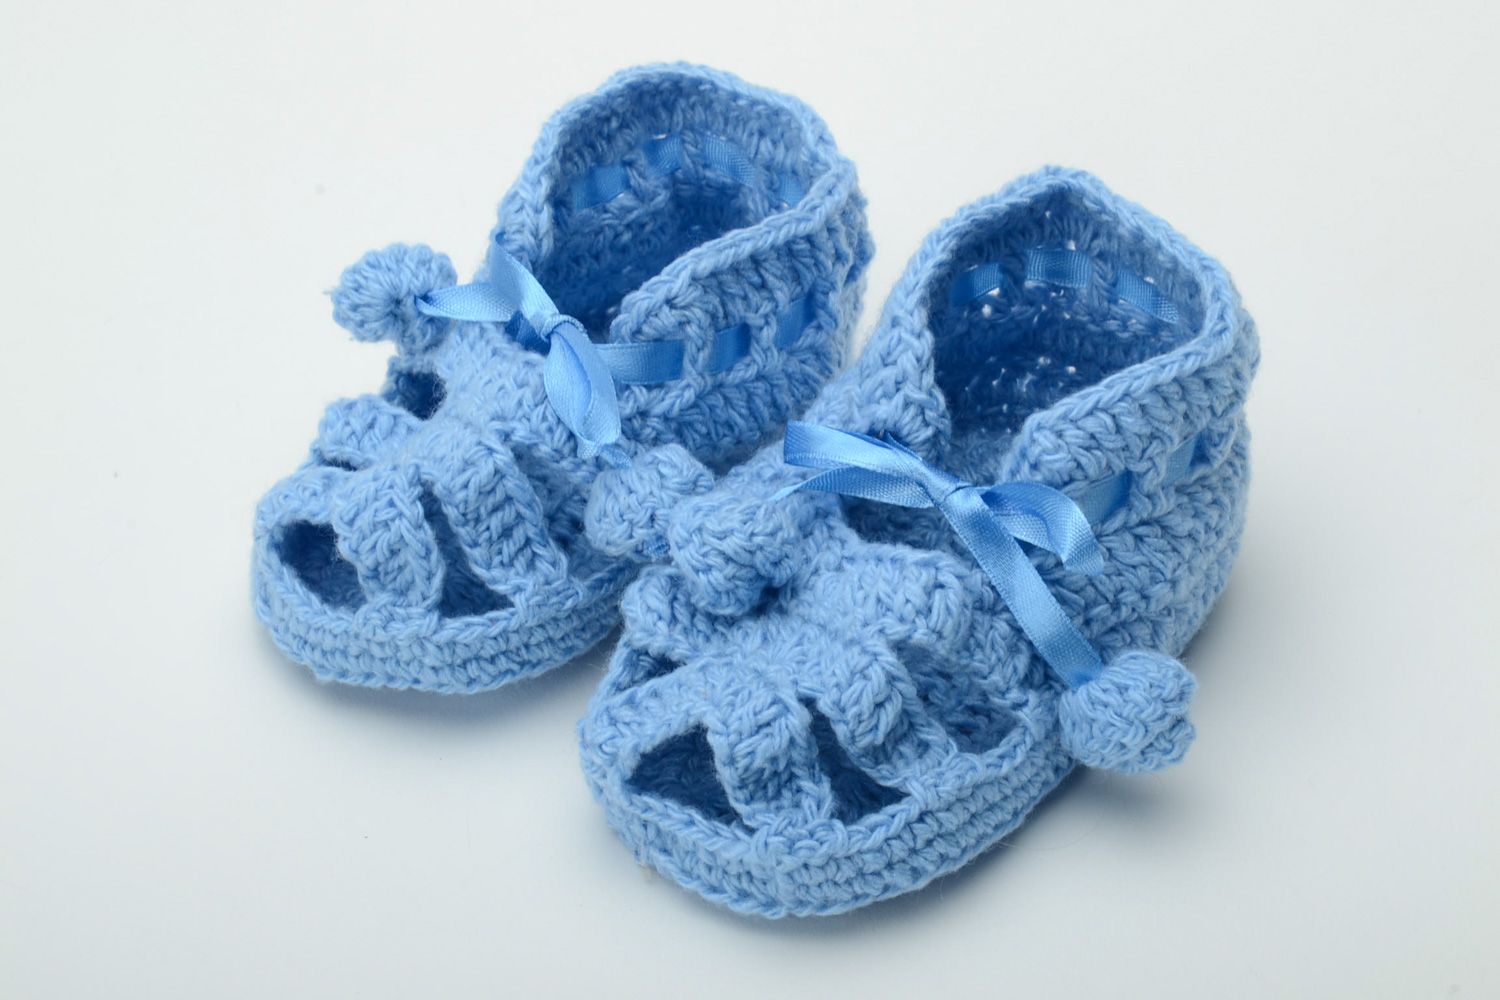 Handmade crochet acrylic and cotton baby booties of blue color photo 2